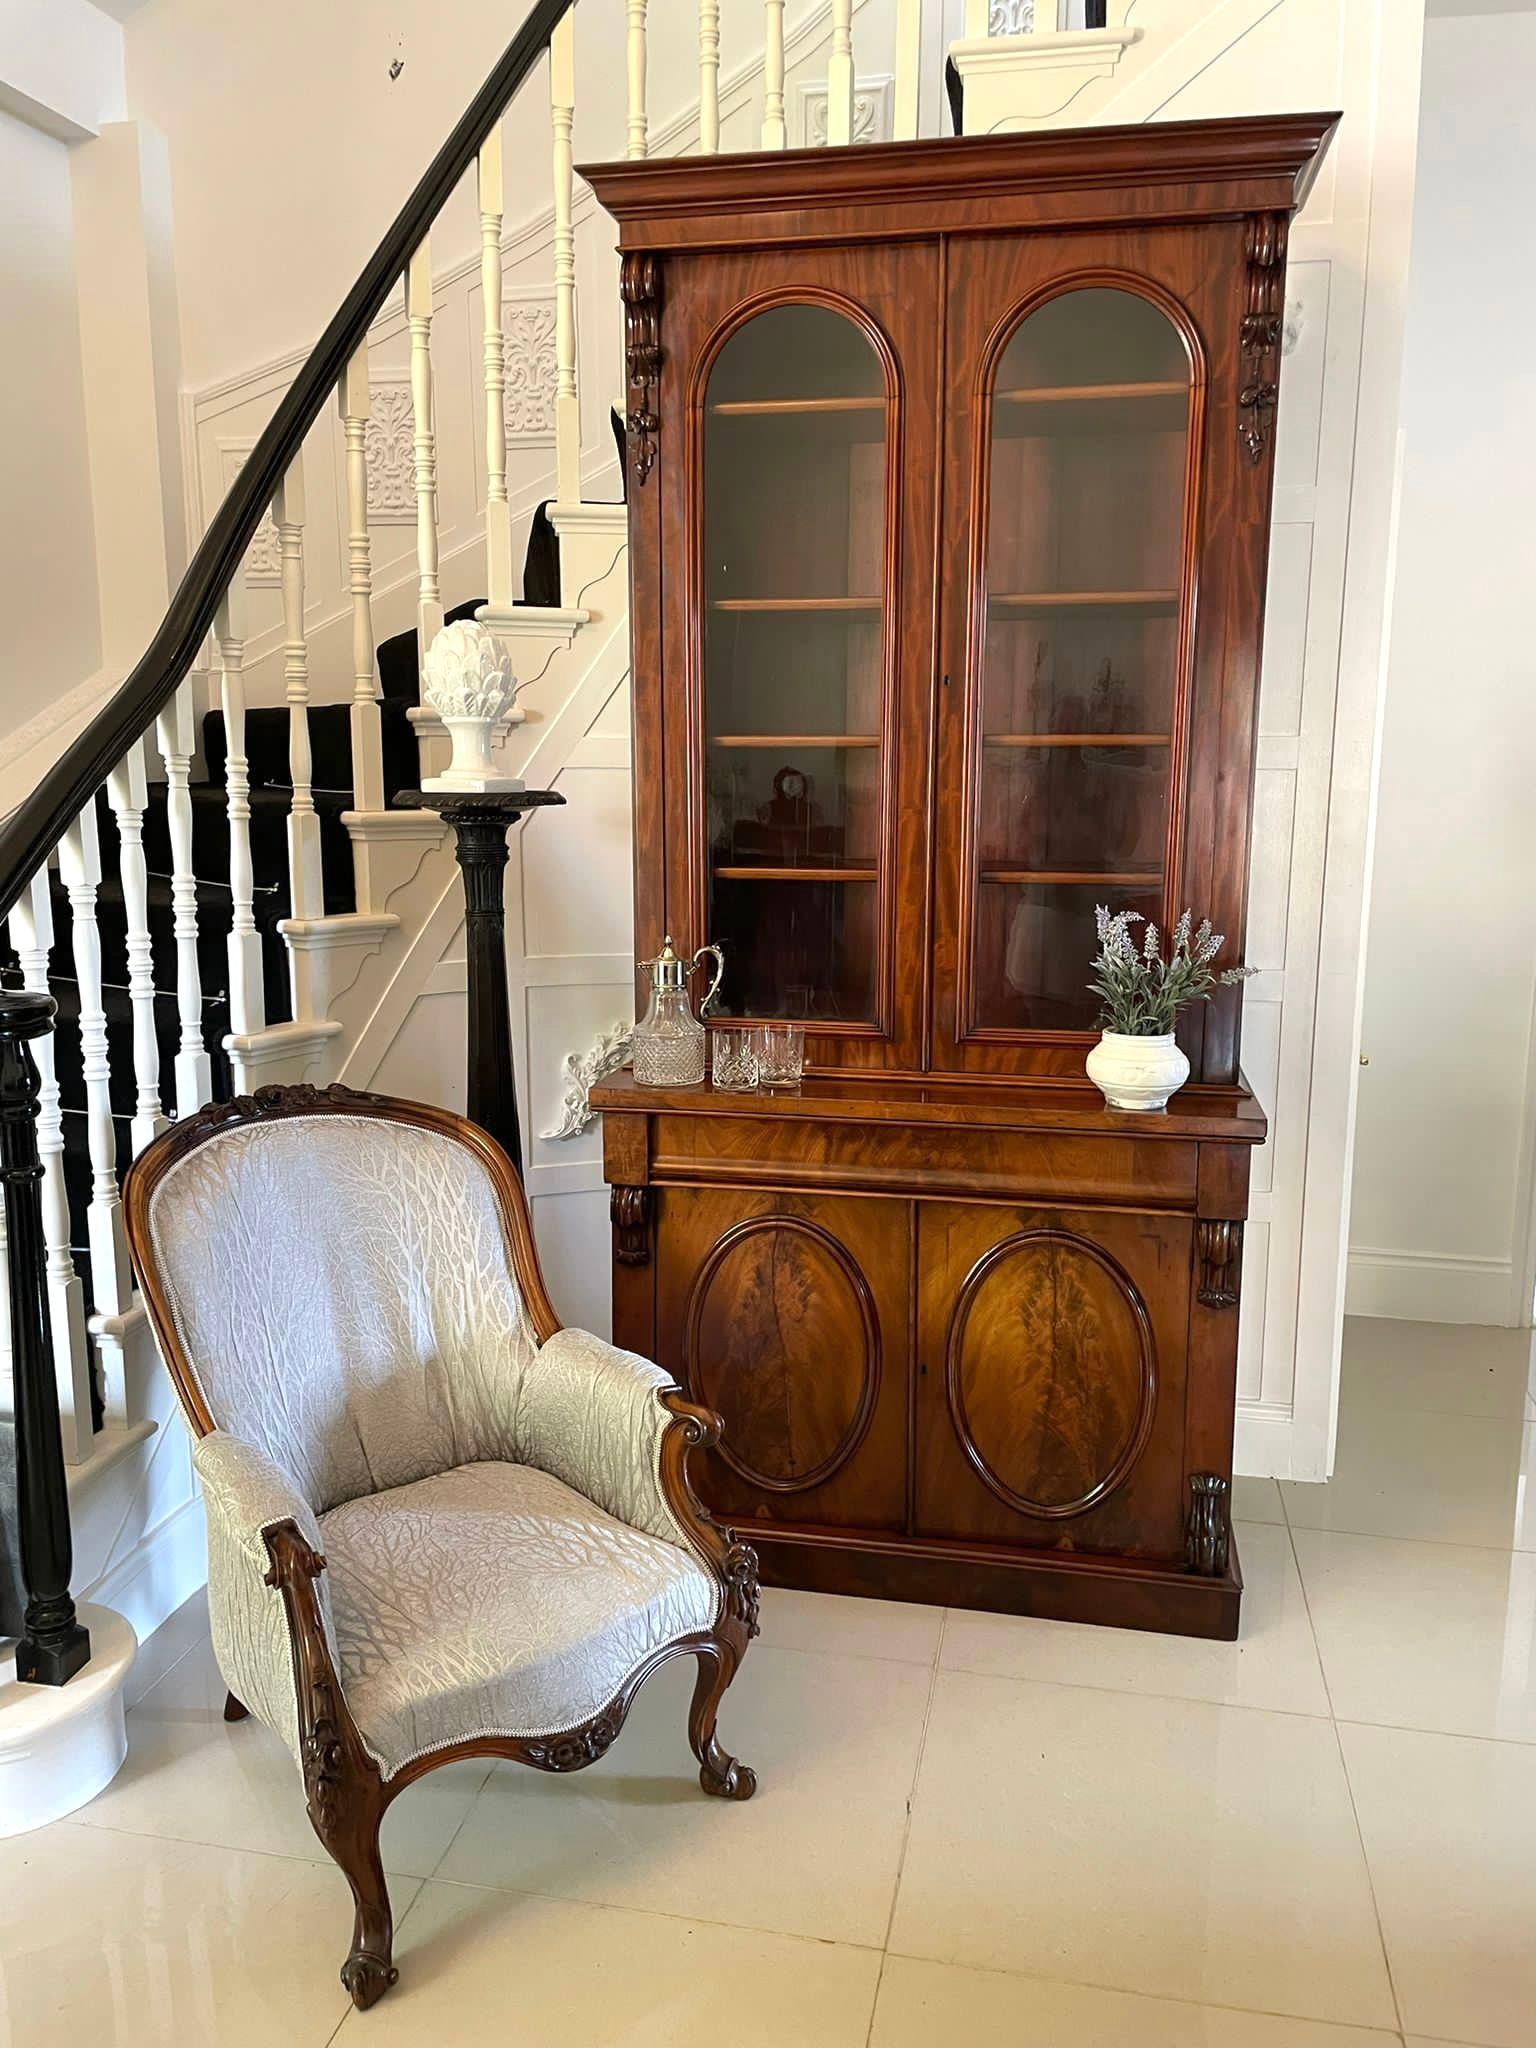 Outstanding quality antique Victorian figured mahogany glazed cupboard bookcase having a shaped moulded cornice above a figured mahogany frieze above a pair of figured mahogany glazed arched shaped doors with mahogany moulding. The doors open to